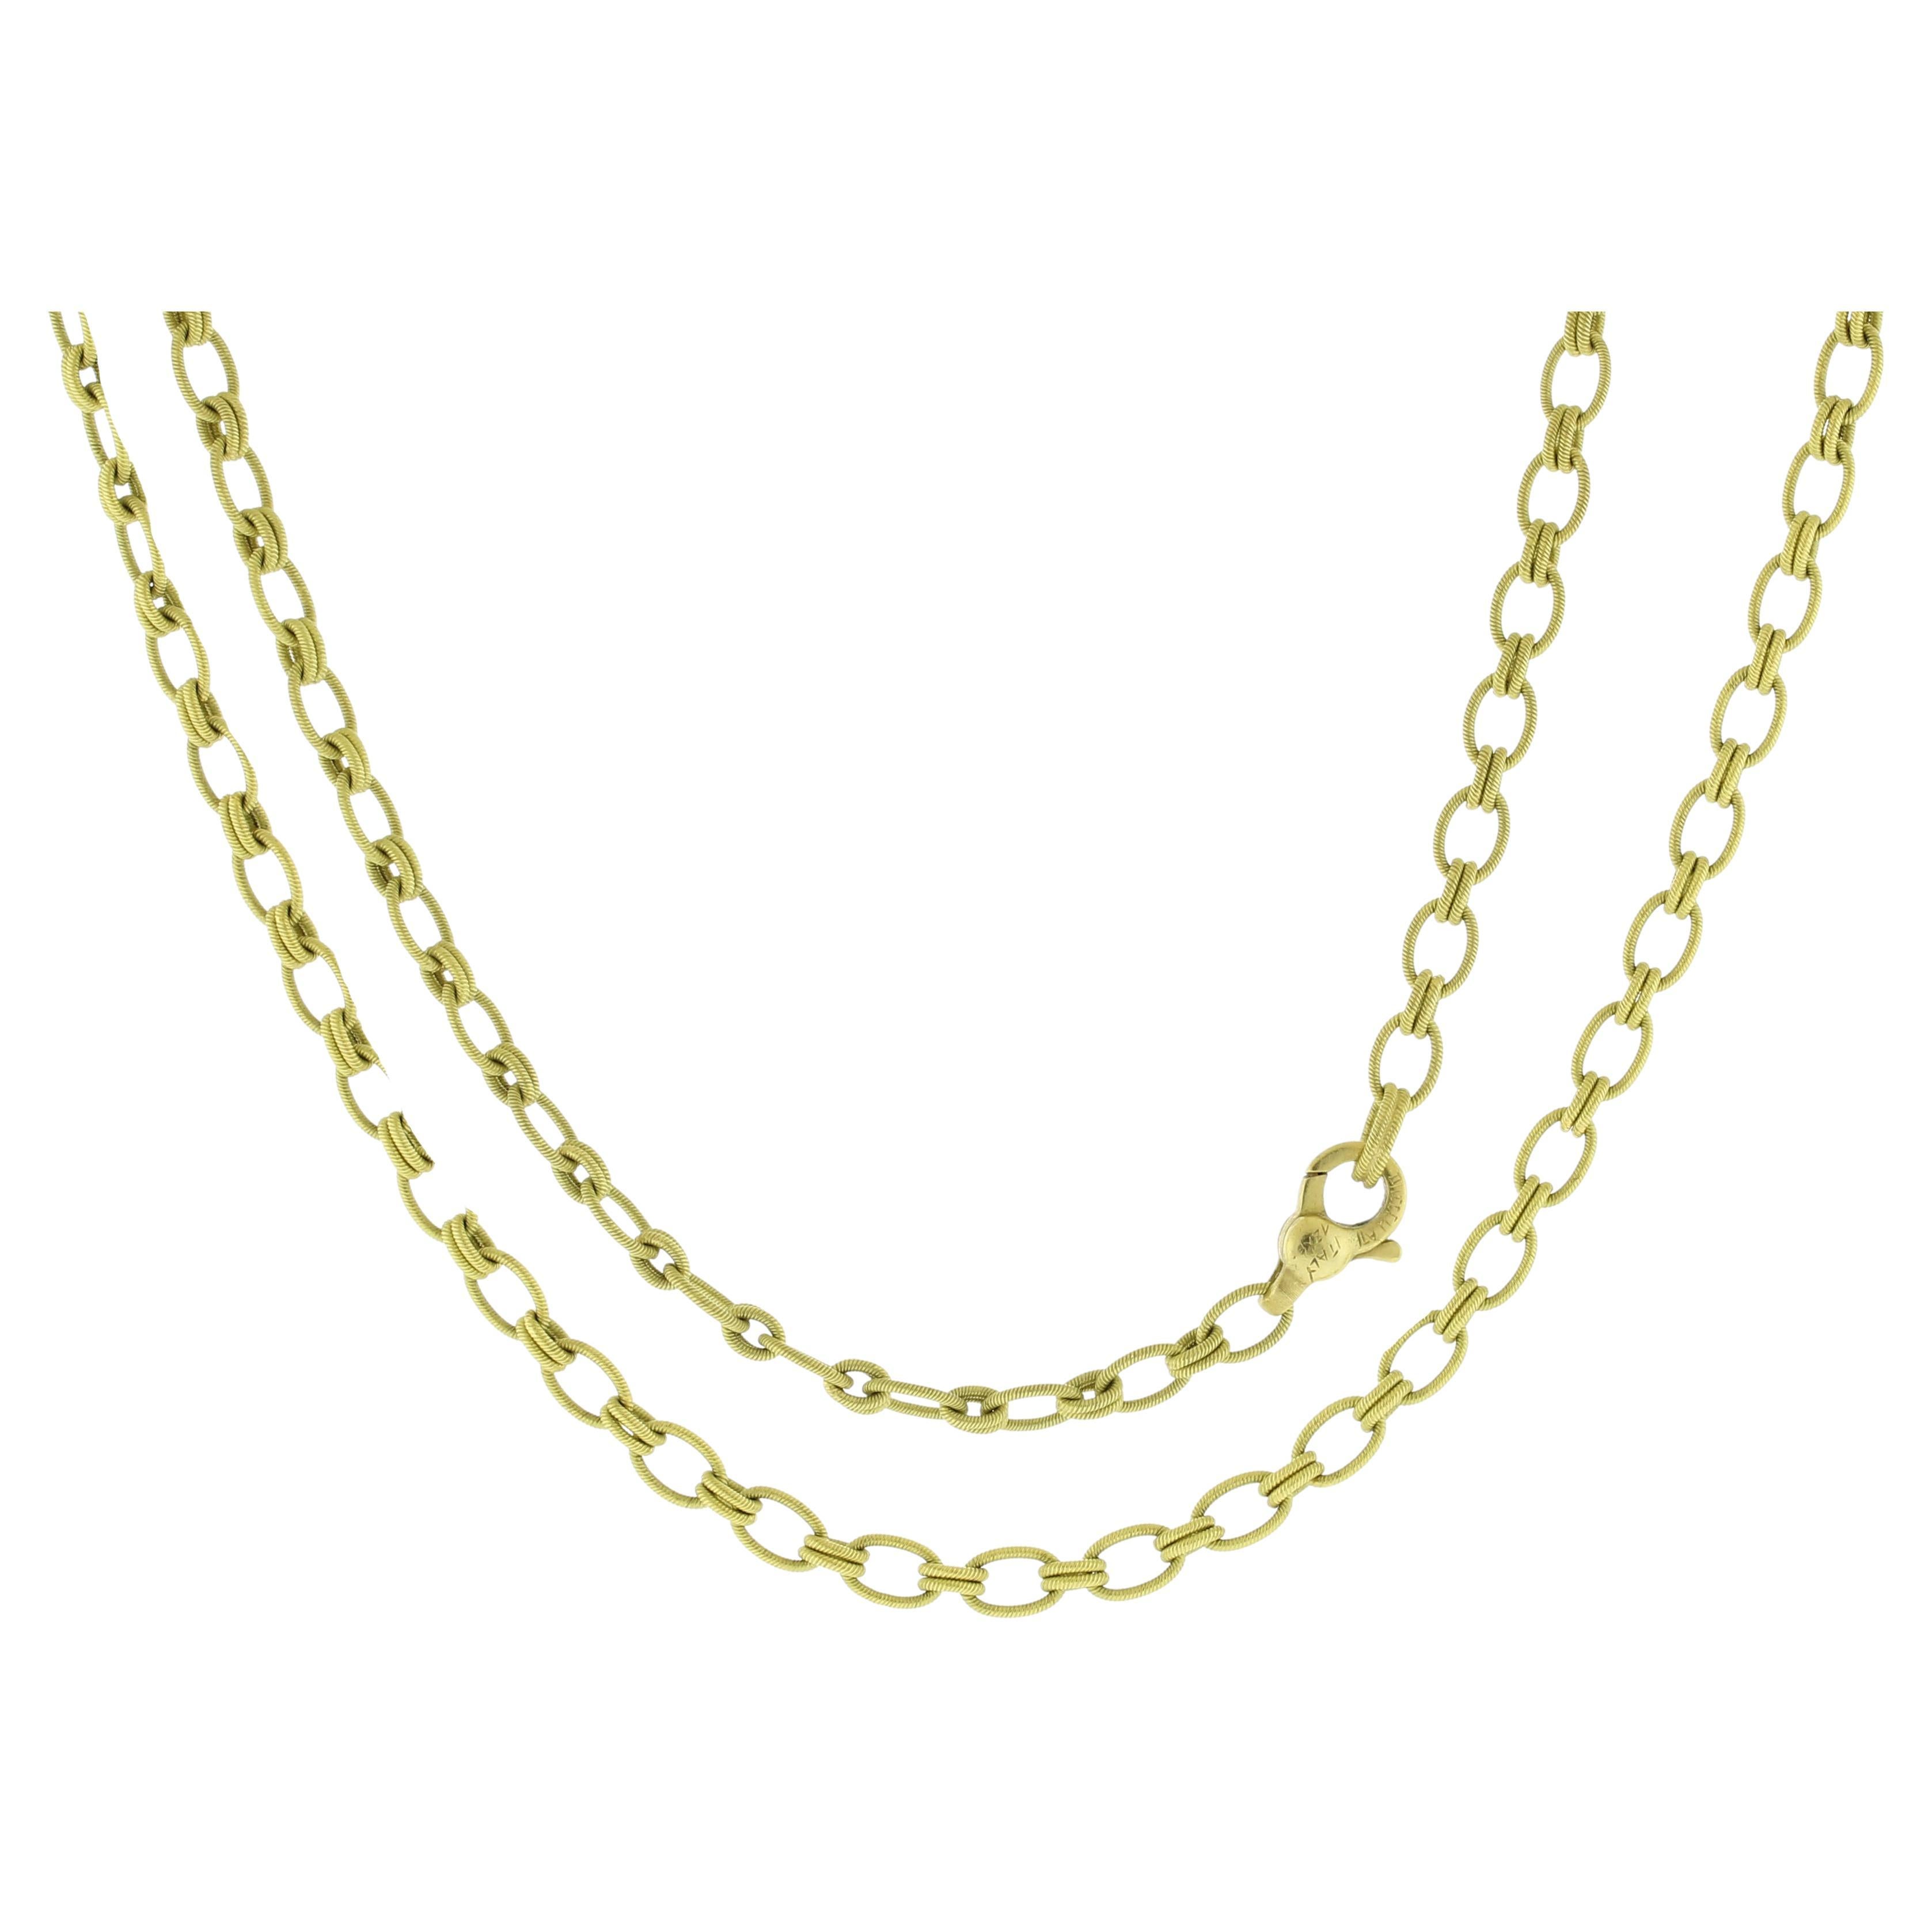 Buccellati Textured Oval Link Chain Necklace